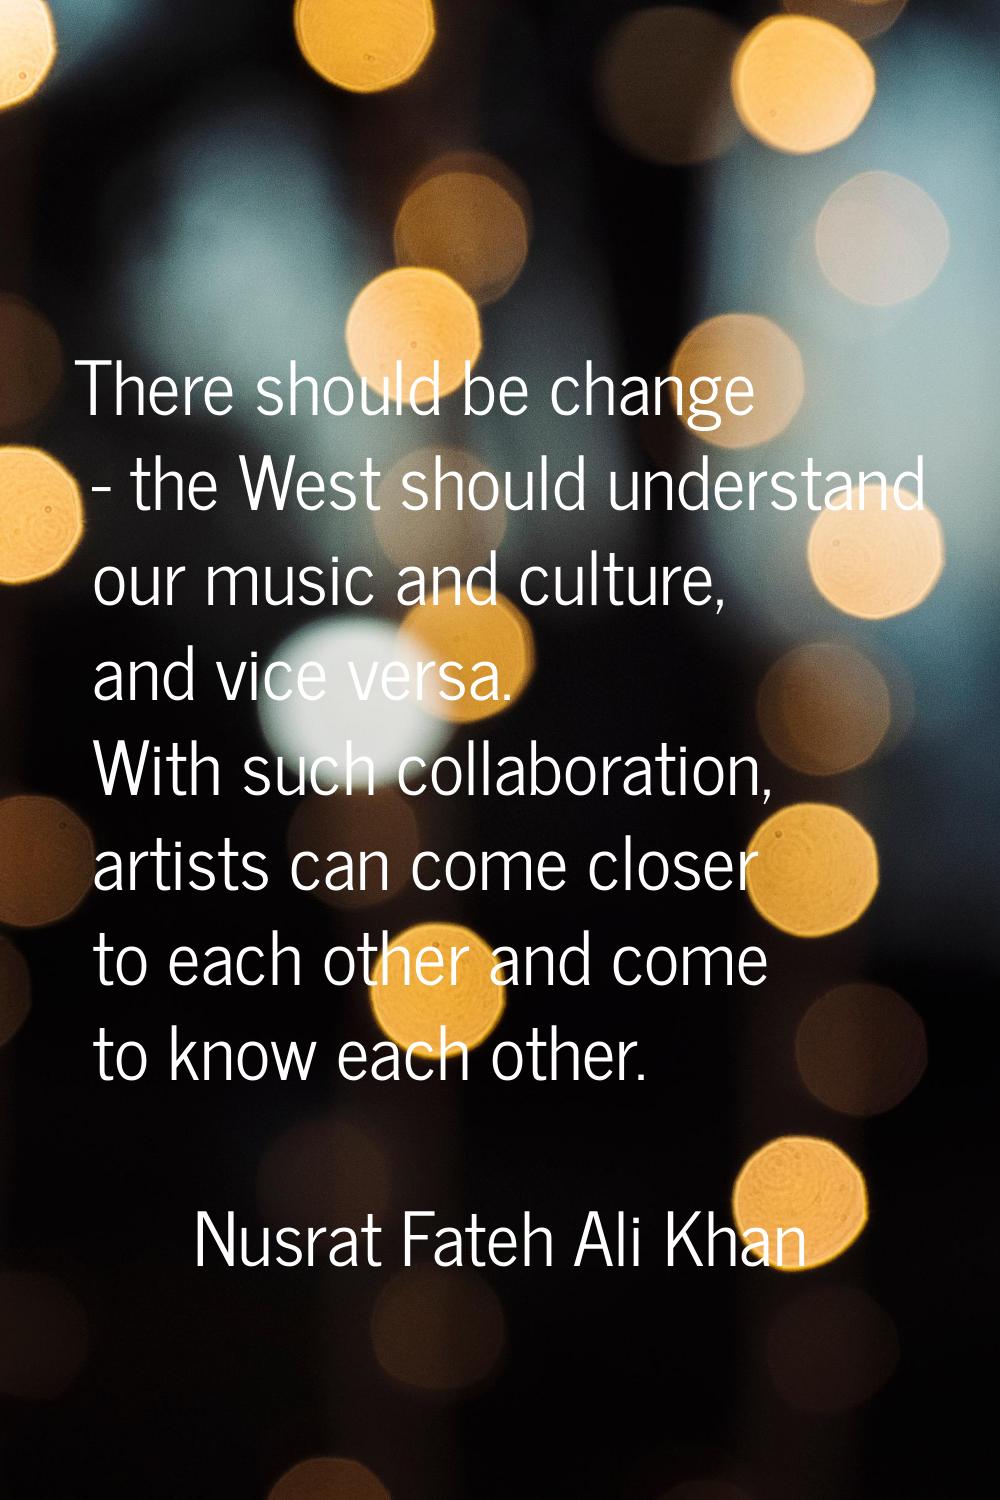 There should be change - the West should understand our music and culture, and vice versa. With suc